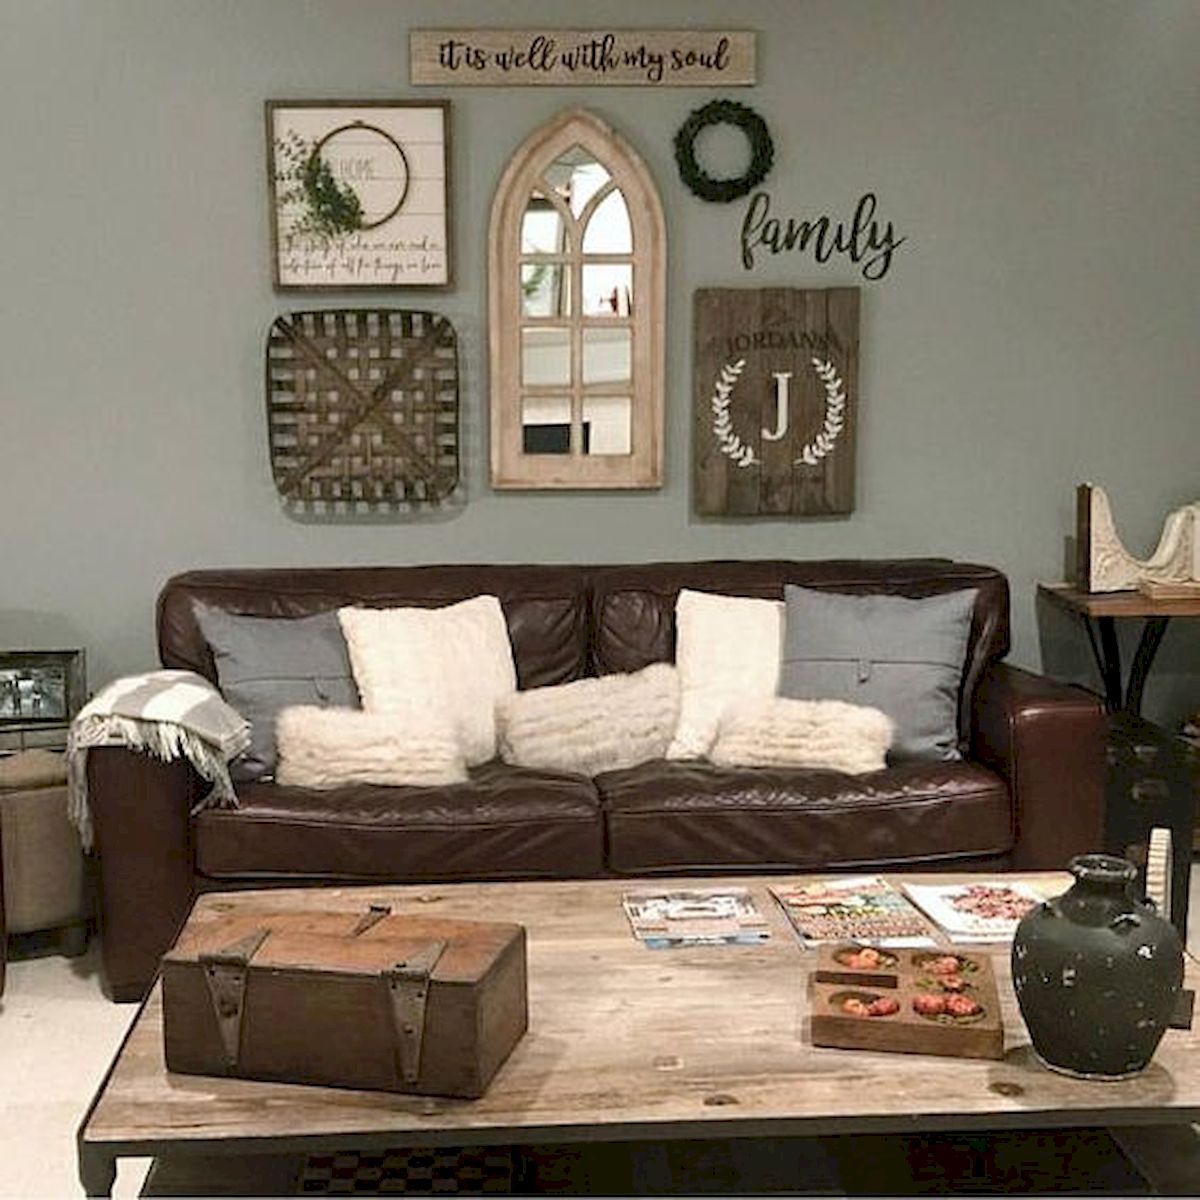 70 Awesome Wall Decoration Ideas for Living Room (52)